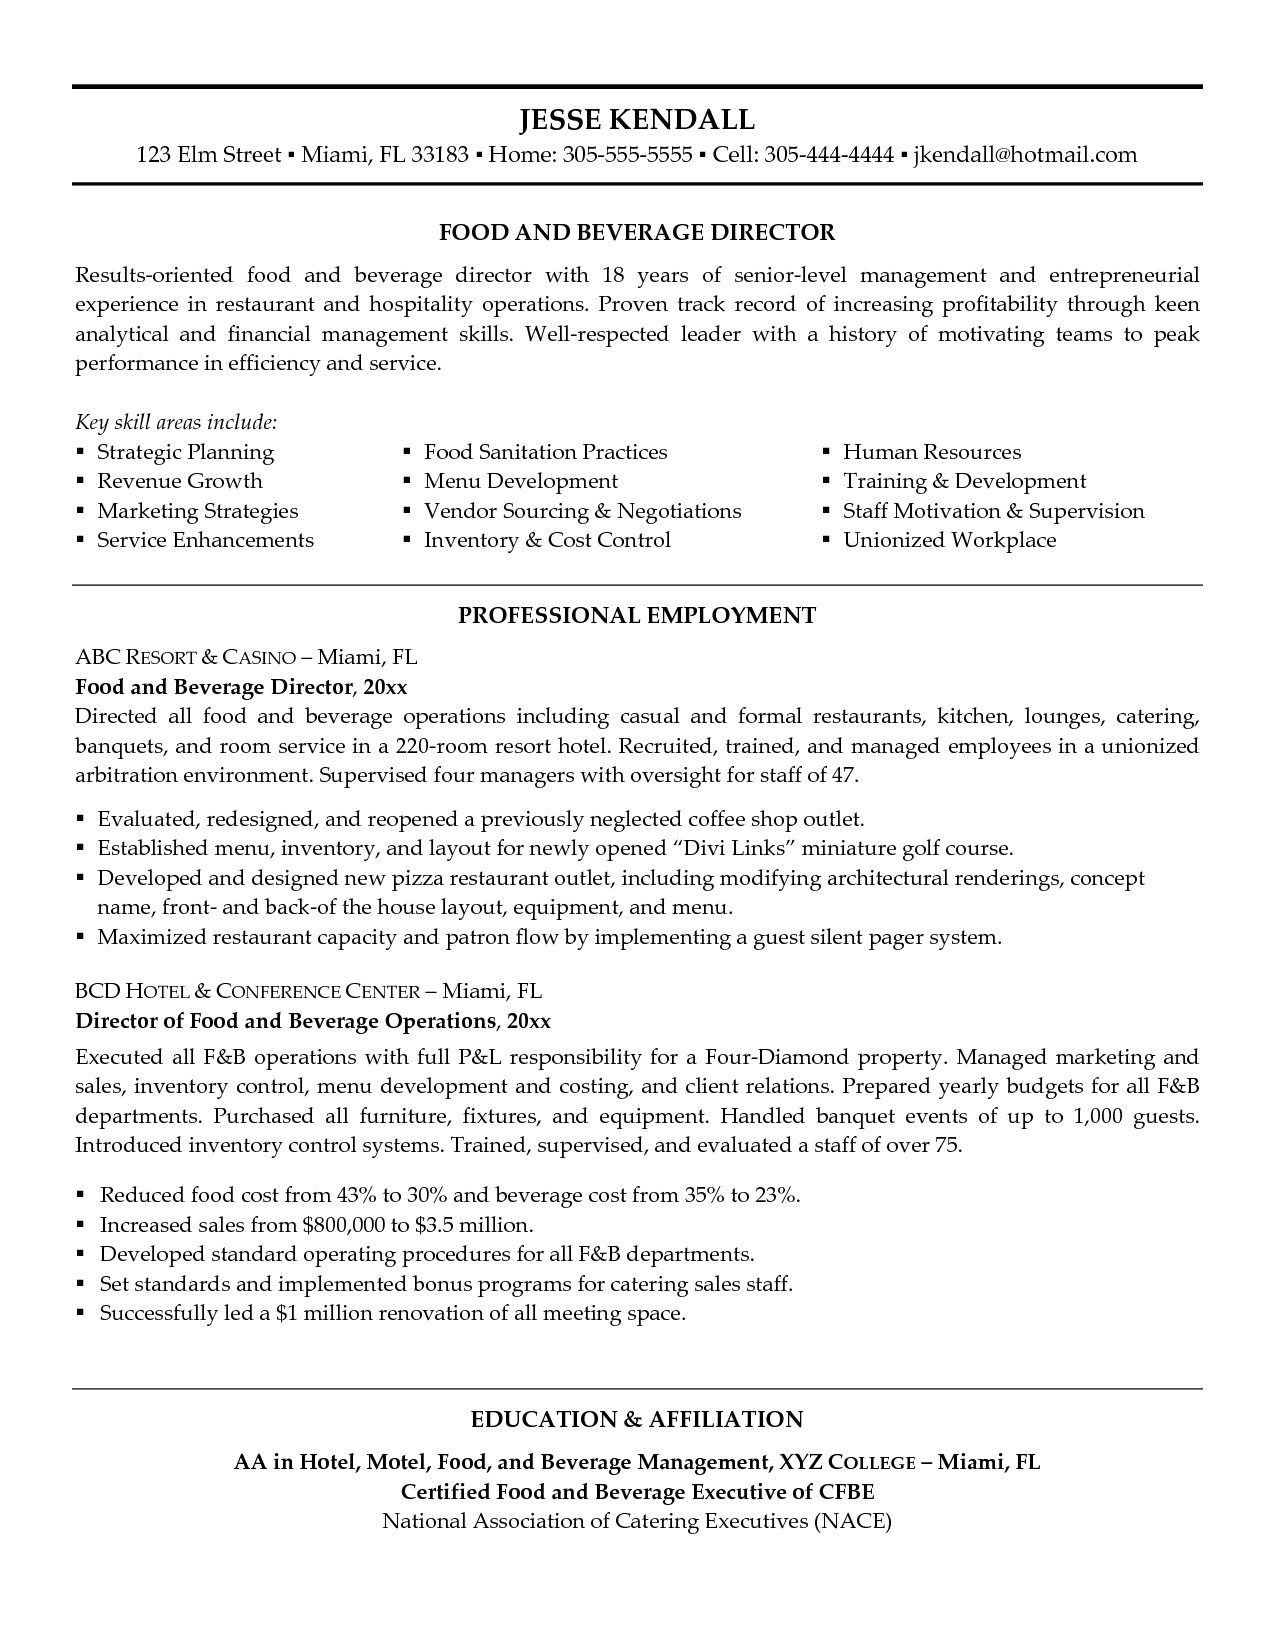 food and beverage manager resume 1550